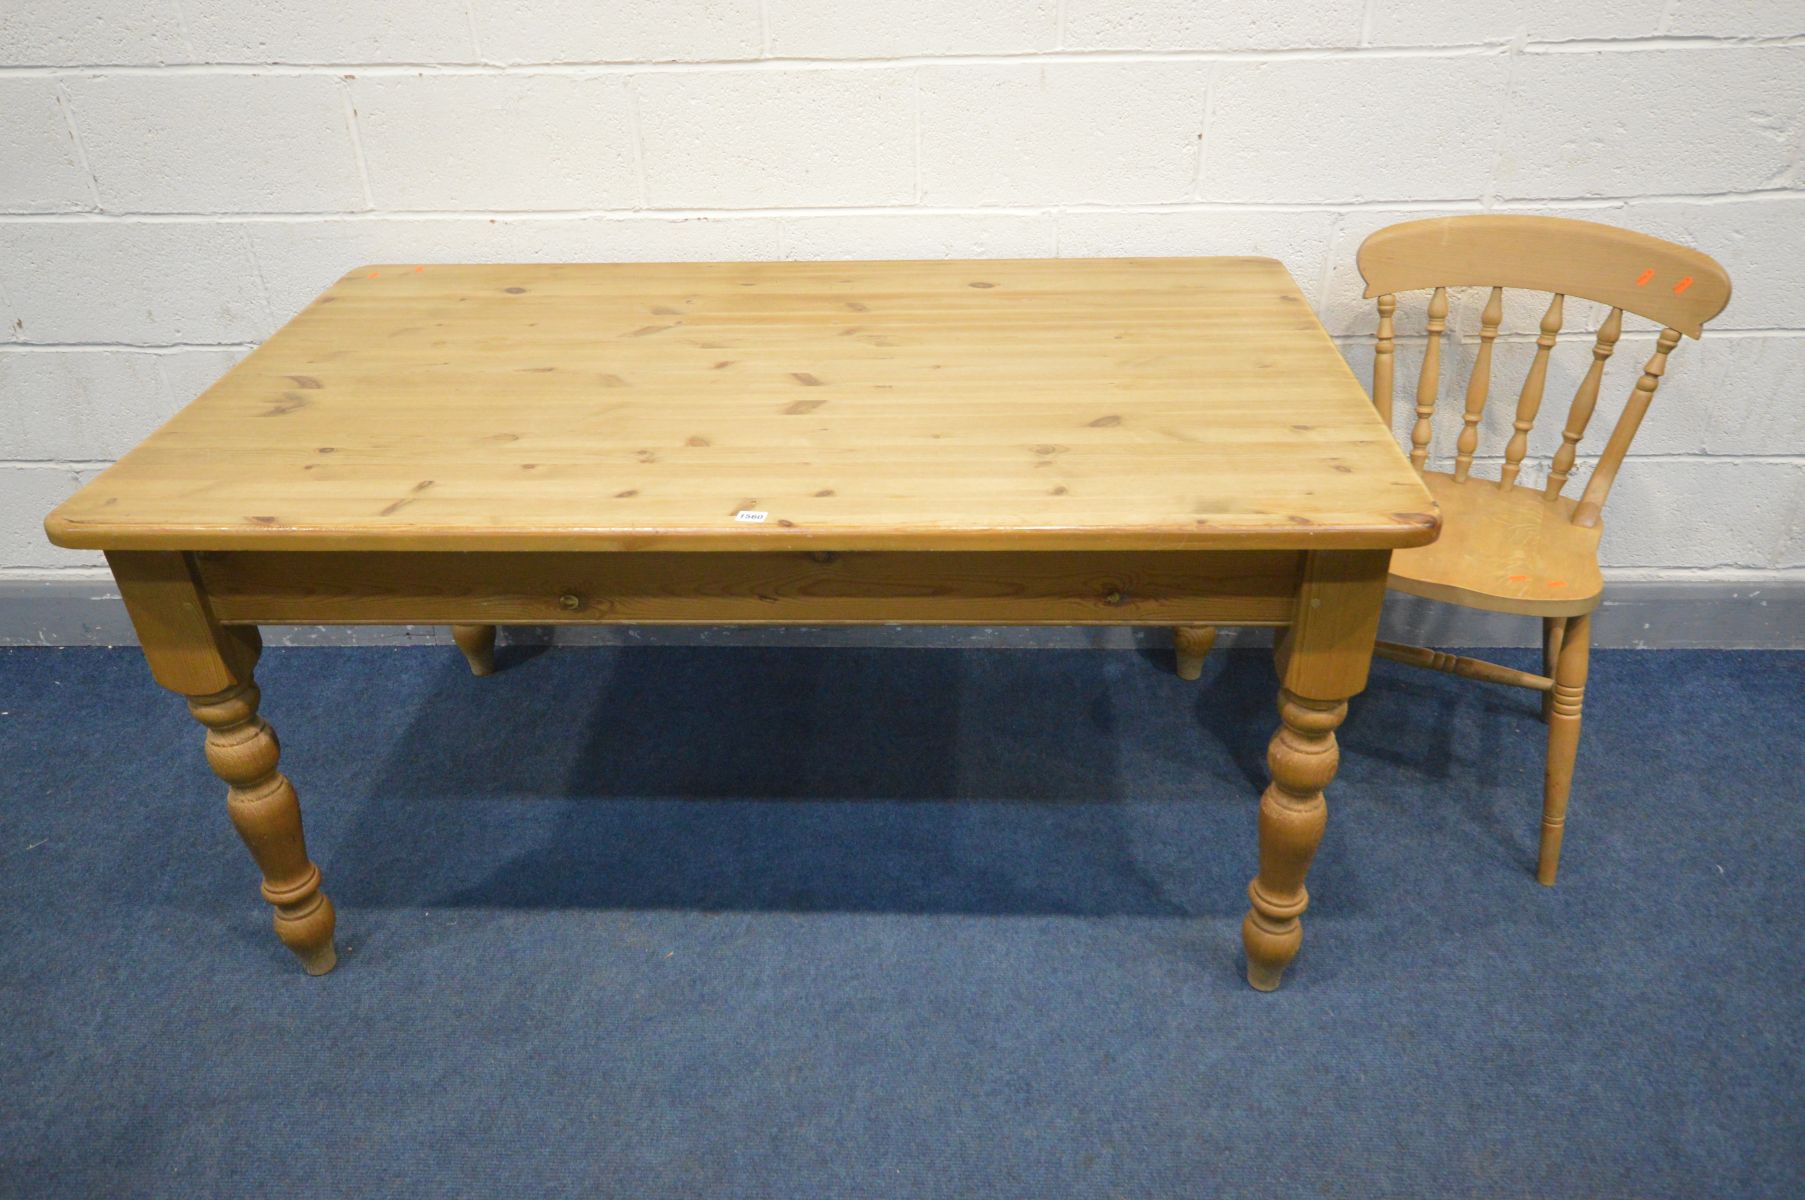 A PINE KITCHEN TABLE with a single drawer, length 153cm x depth 92cm x height 78cm and a beech chair